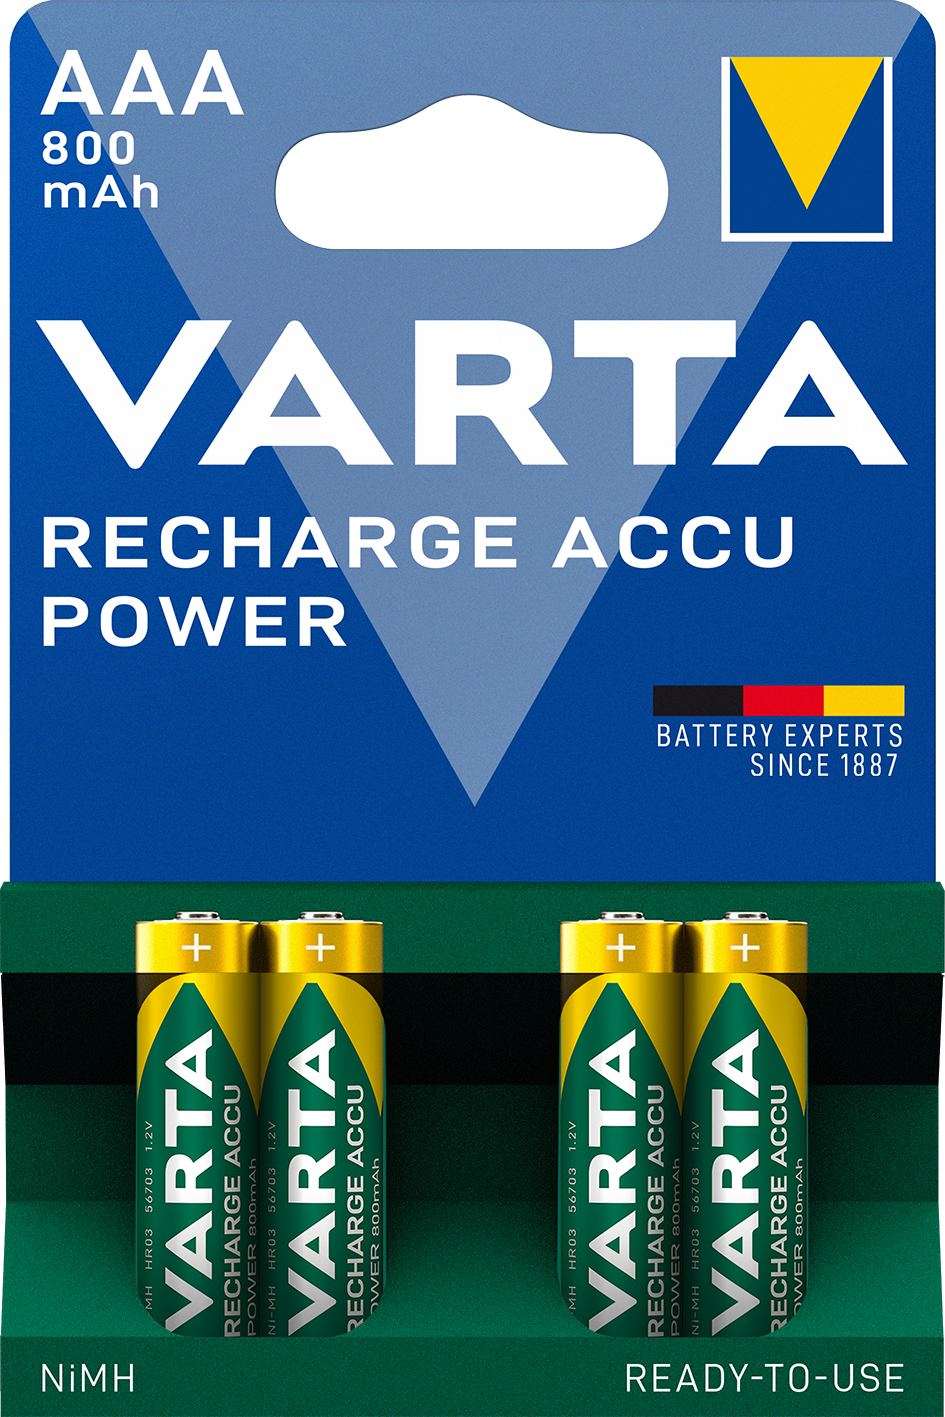 Varta Rechargeable Power Ready to Use - (4 batteries AAA - 800mAh)